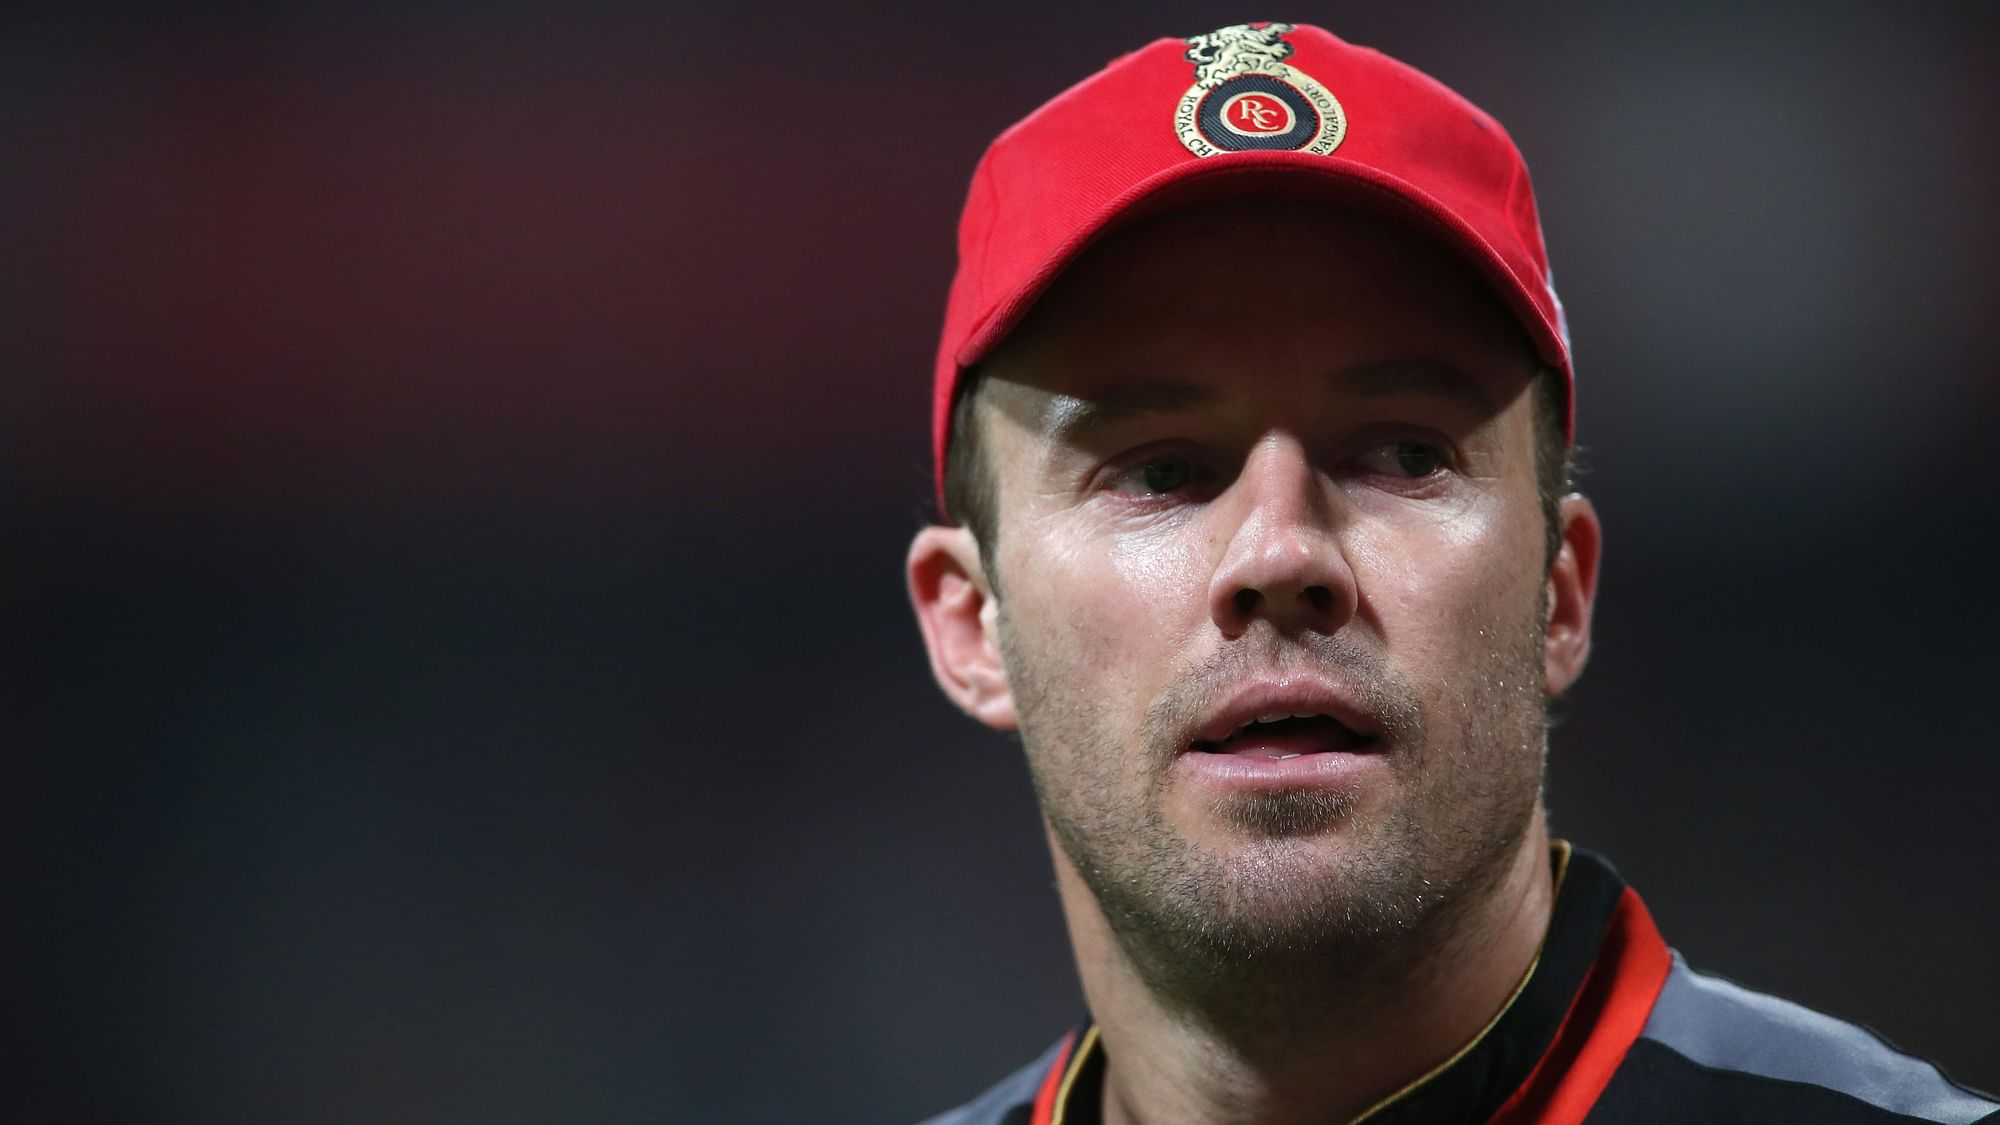 In a music video posted on social media, AB de Villiers sang for equality and human spirit.